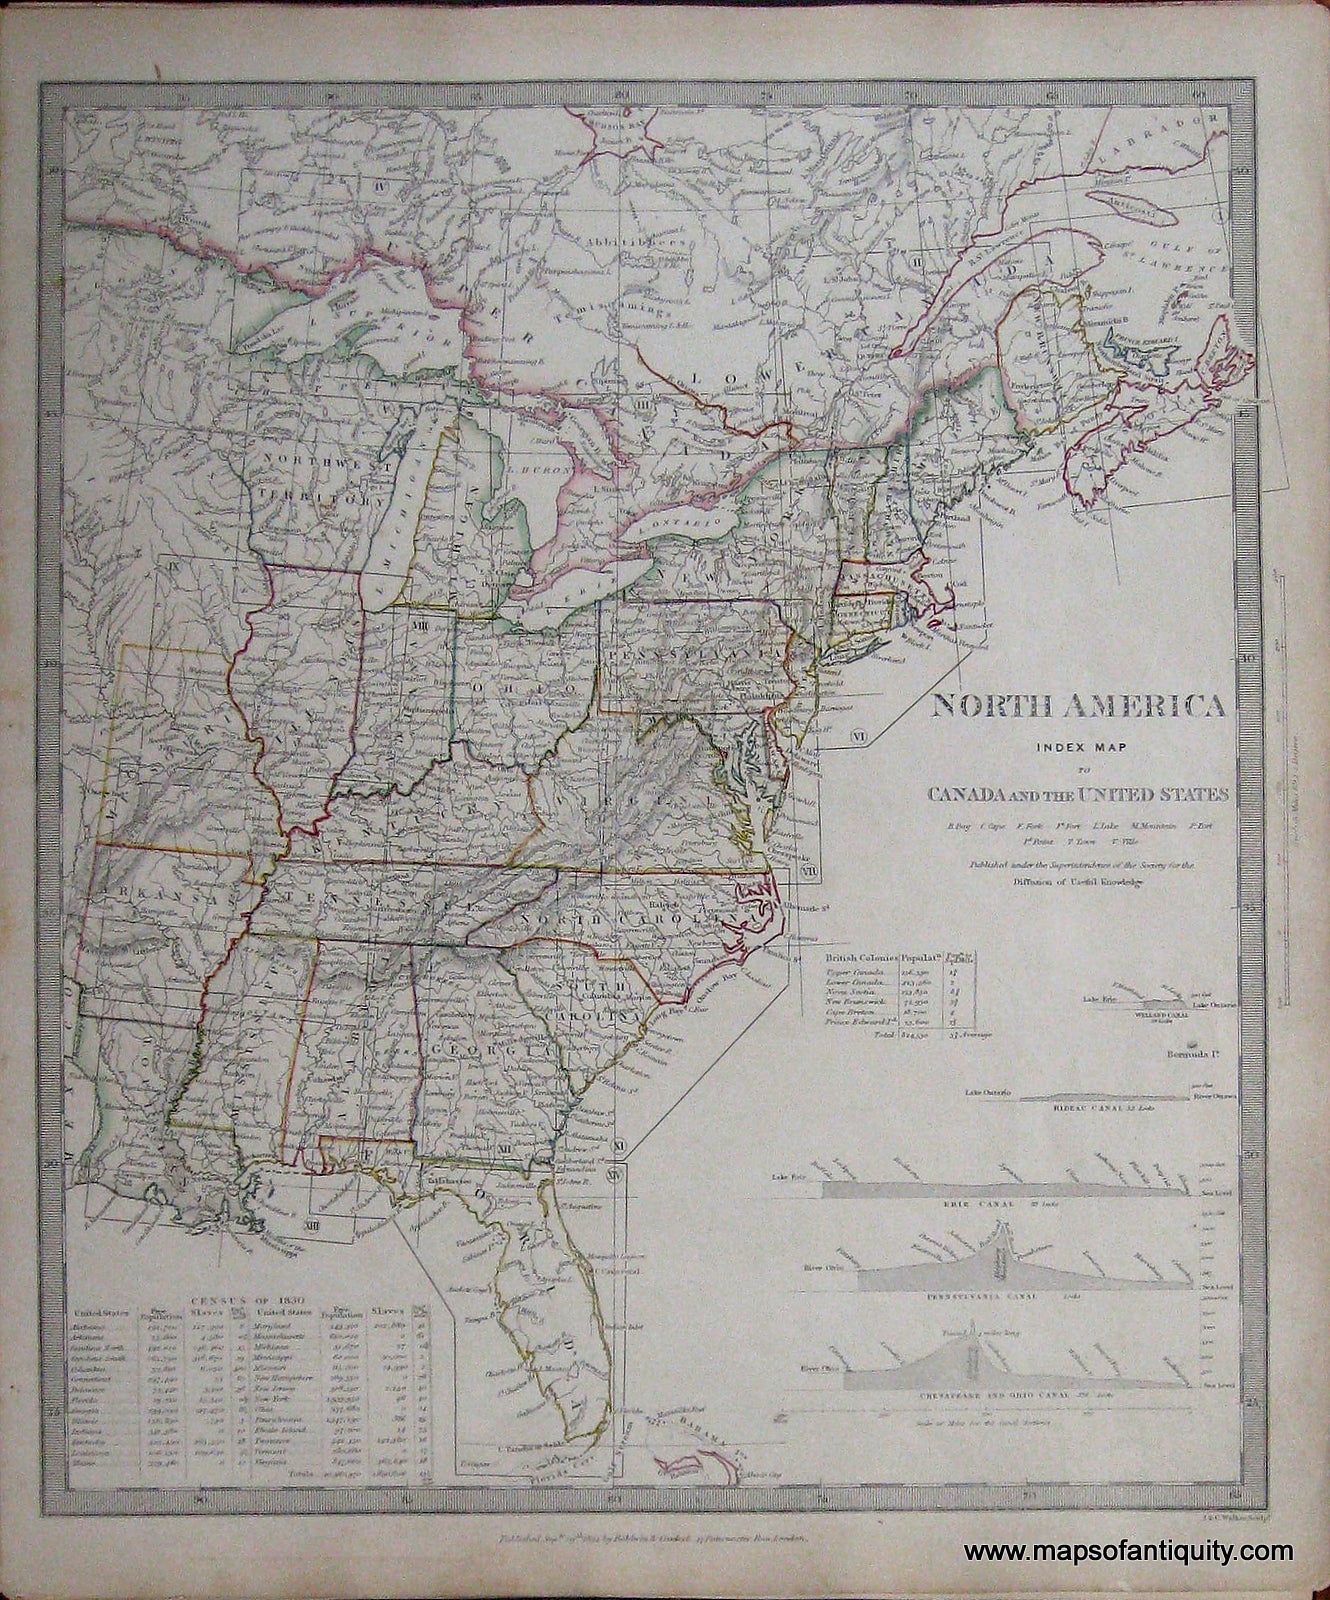 Antique-Hand-Colored-Map-North-America-Index-Map-of-Canada-and-the-United-States-North-America-United-States-General---1840/1844-SDUK/Society-for-the-Diffusion-of-Useful-Knowledge-Maps-Of-Antiquity